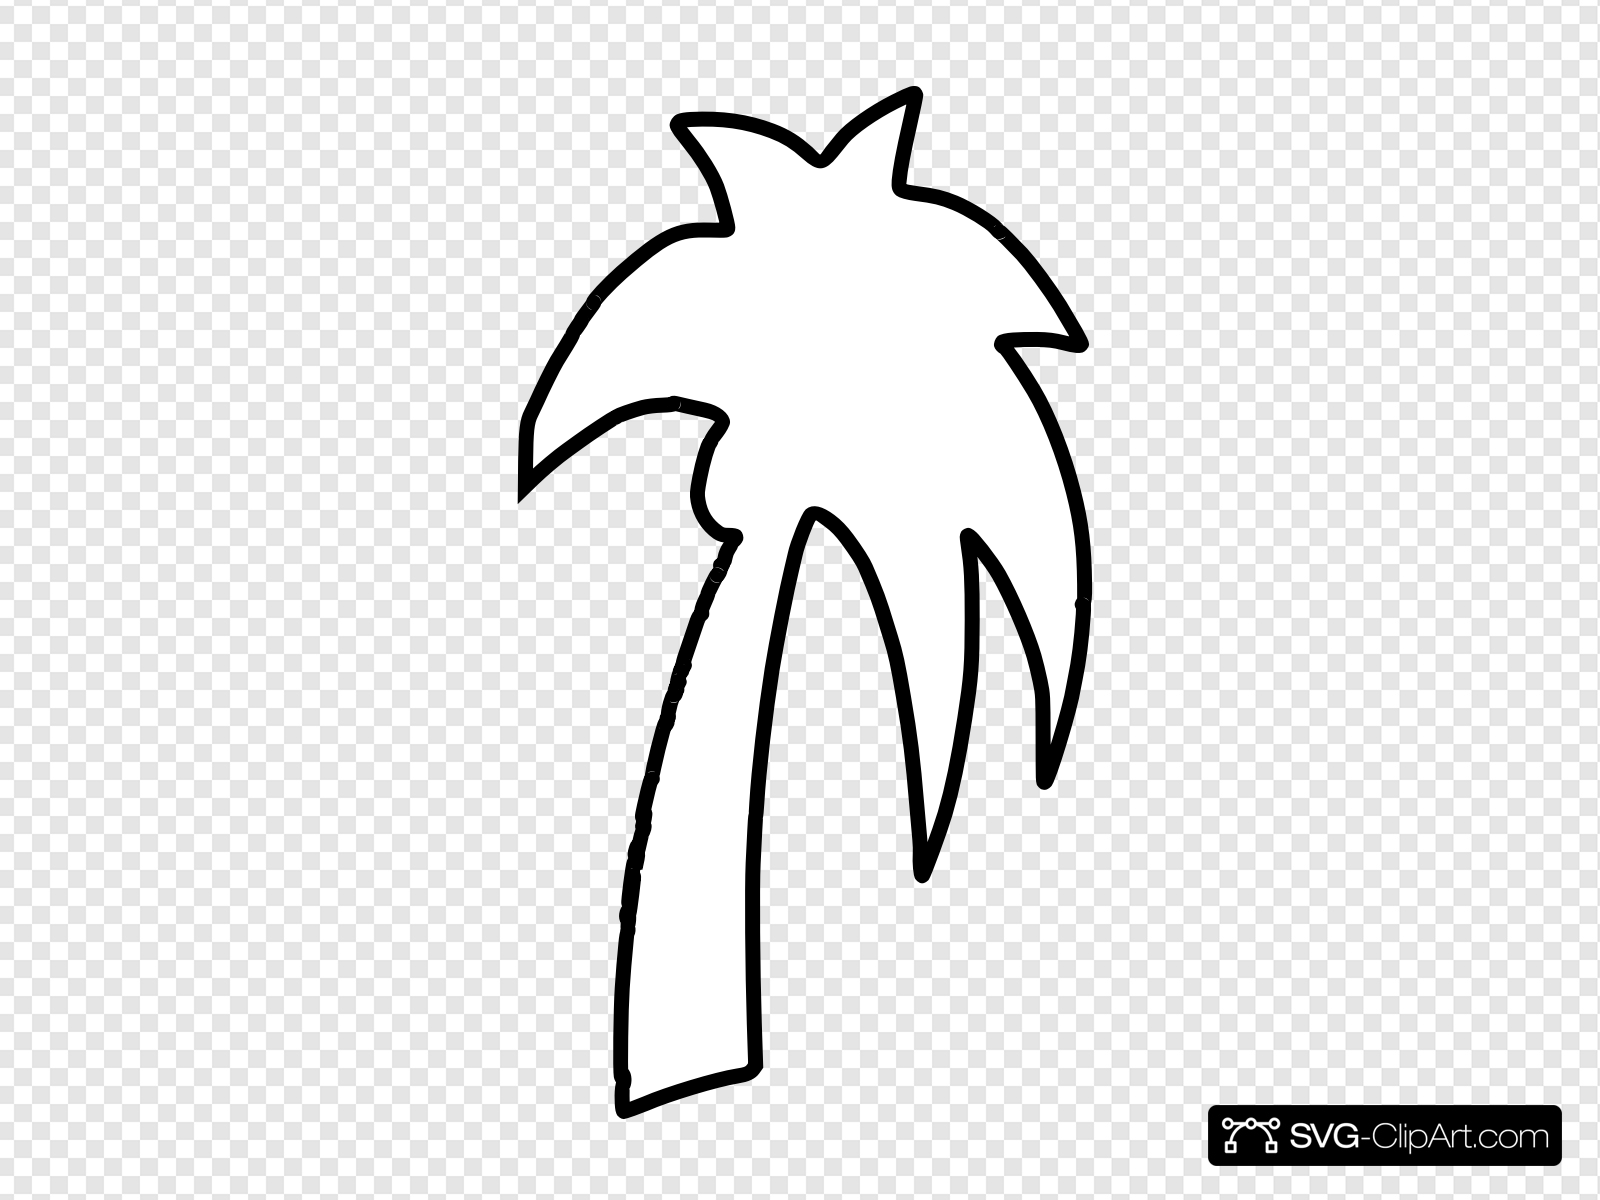 Palm Tree Outline Clip art, Icon and SVG.